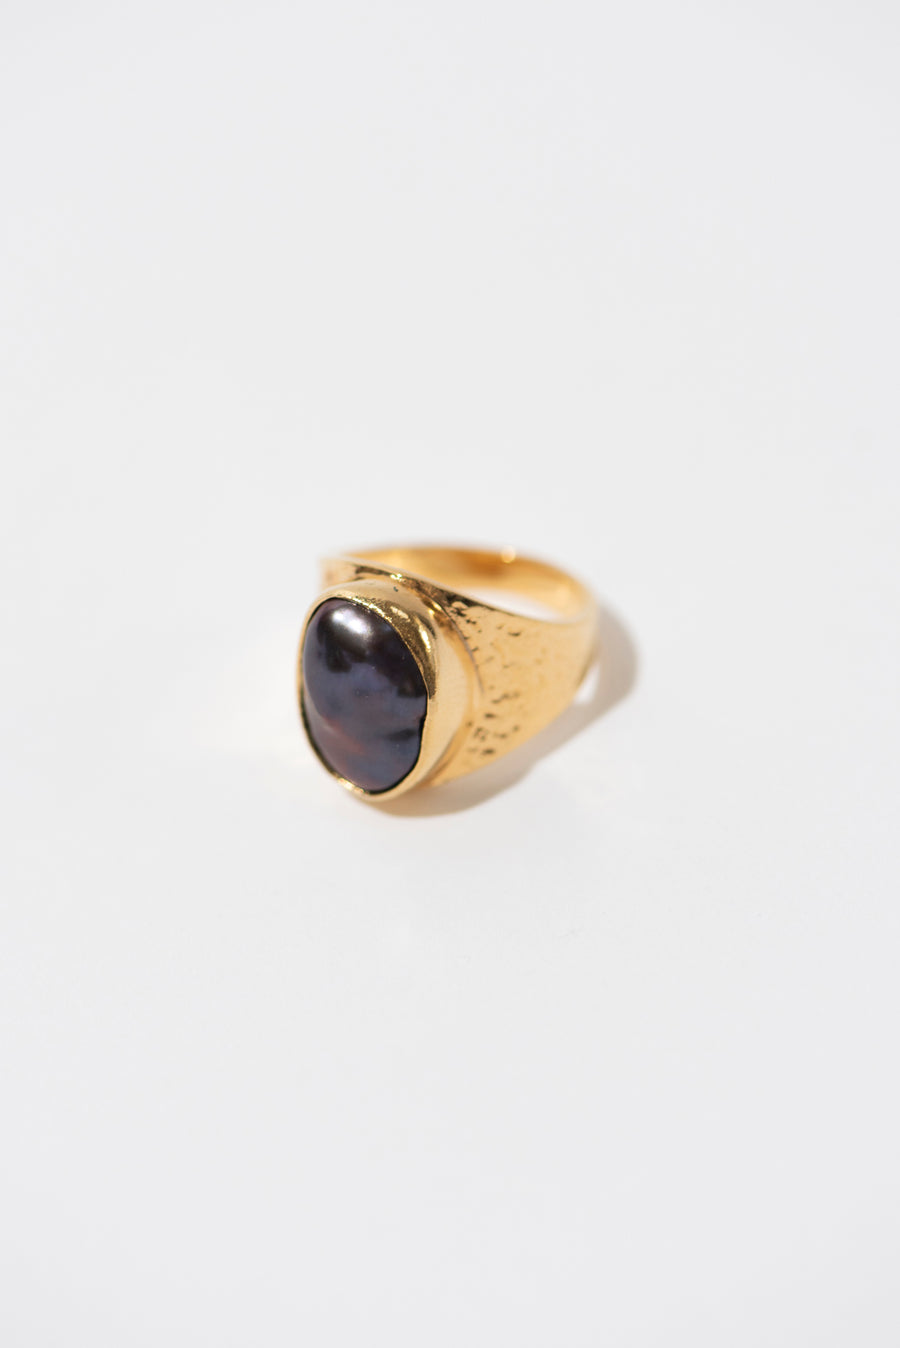 The Signet Black Pearl Ring